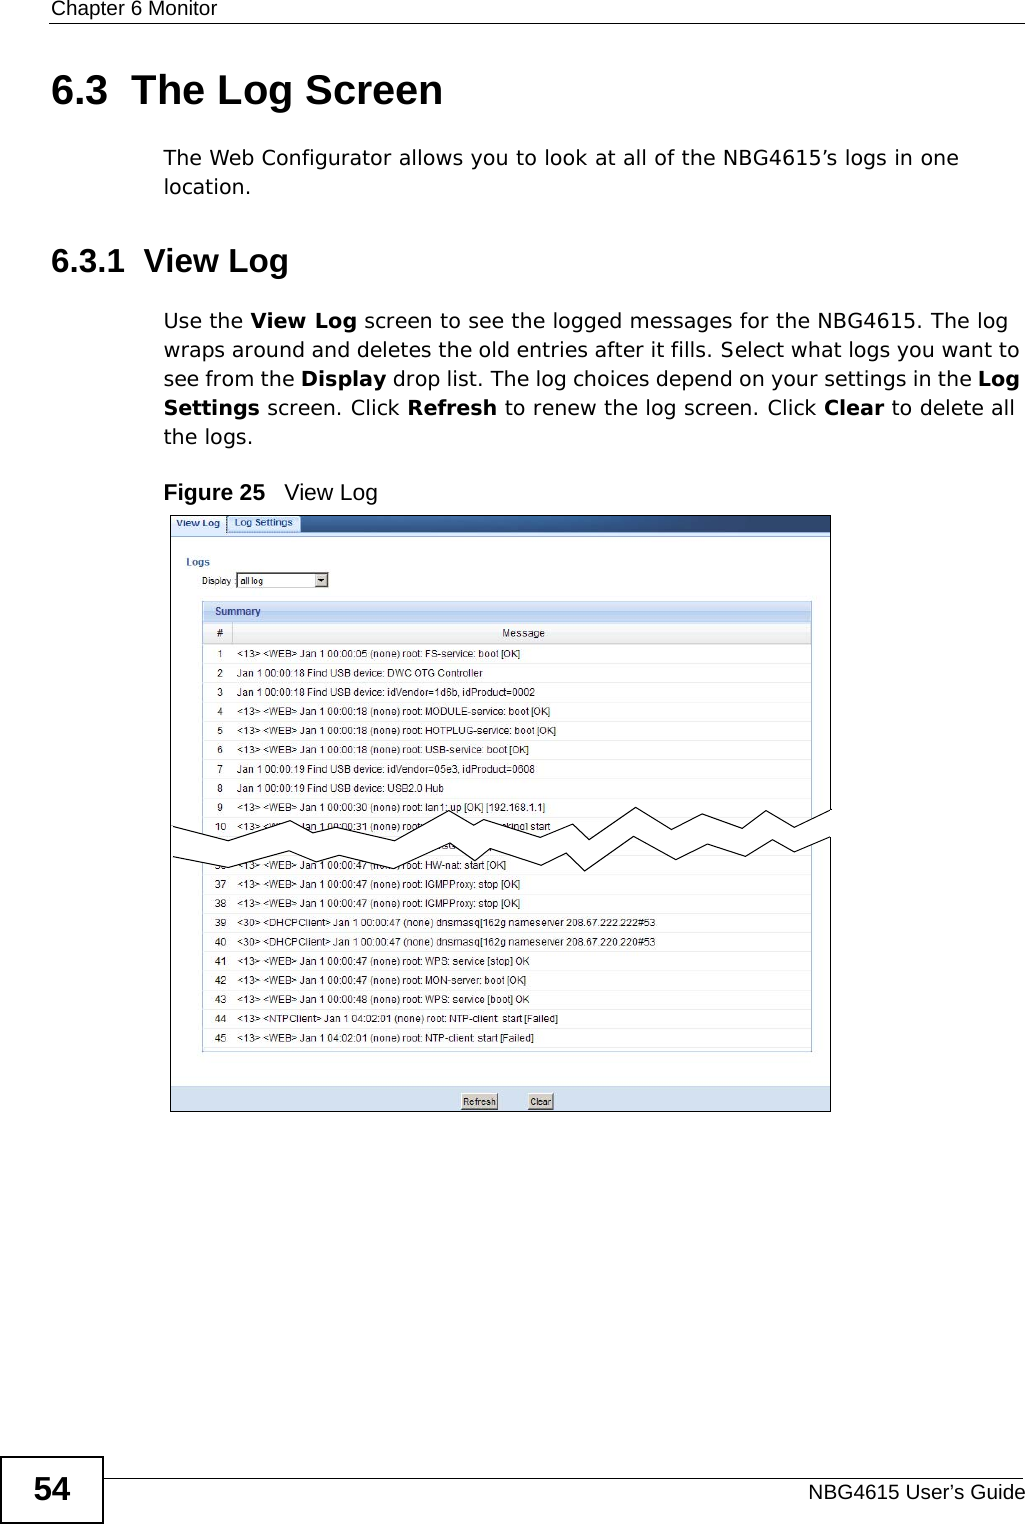 Chapter 6 MonitorNBG4615 User’s Guide546.3  The Log ScreenThe Web Configurator allows you to look at all of the NBG4615’s logs in one location.6.3.1  View LogUse the View Log screen to see the logged messages for the NBG4615. The log wraps around and deletes the old entries after it fills. Select what logs you want to see from the Display drop list. The log choices depend on your settings in the Log Settings screen. Click Refresh to renew the log screen. Click Clear to delete all the logs.Figure 25   View Log